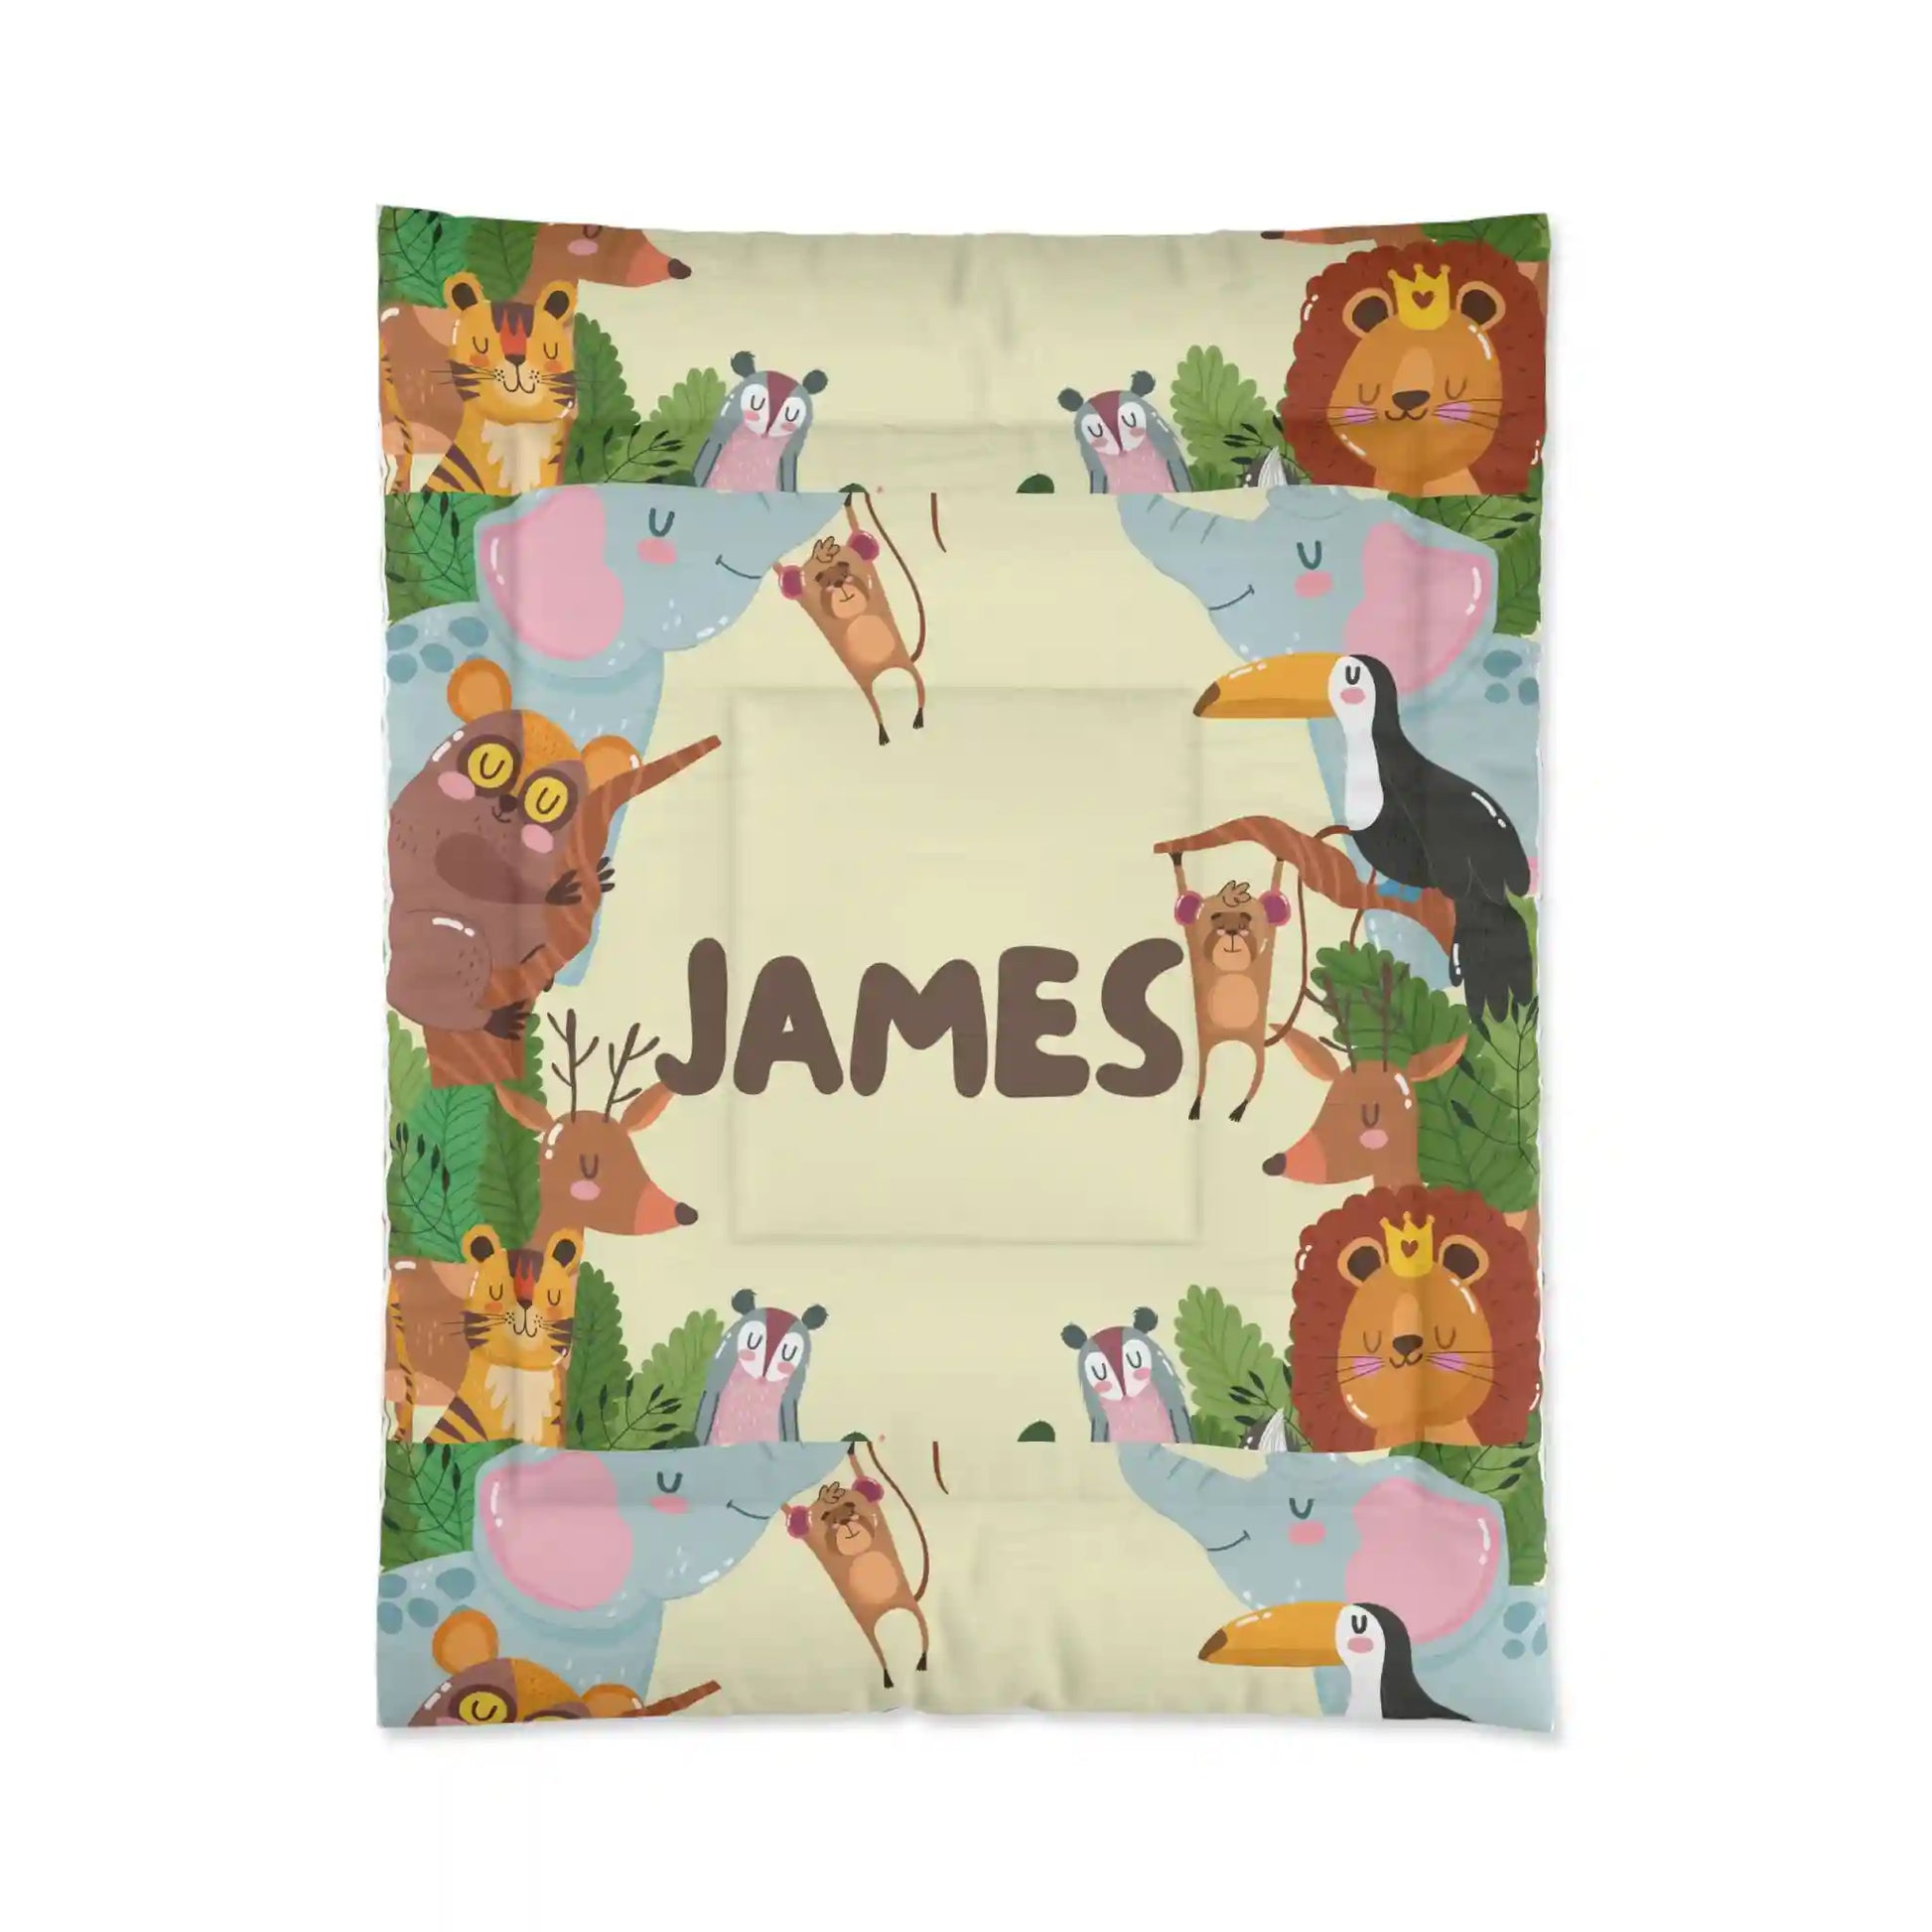 Comforter, quilting, laying, bed quilt (James) - Personalize with your name